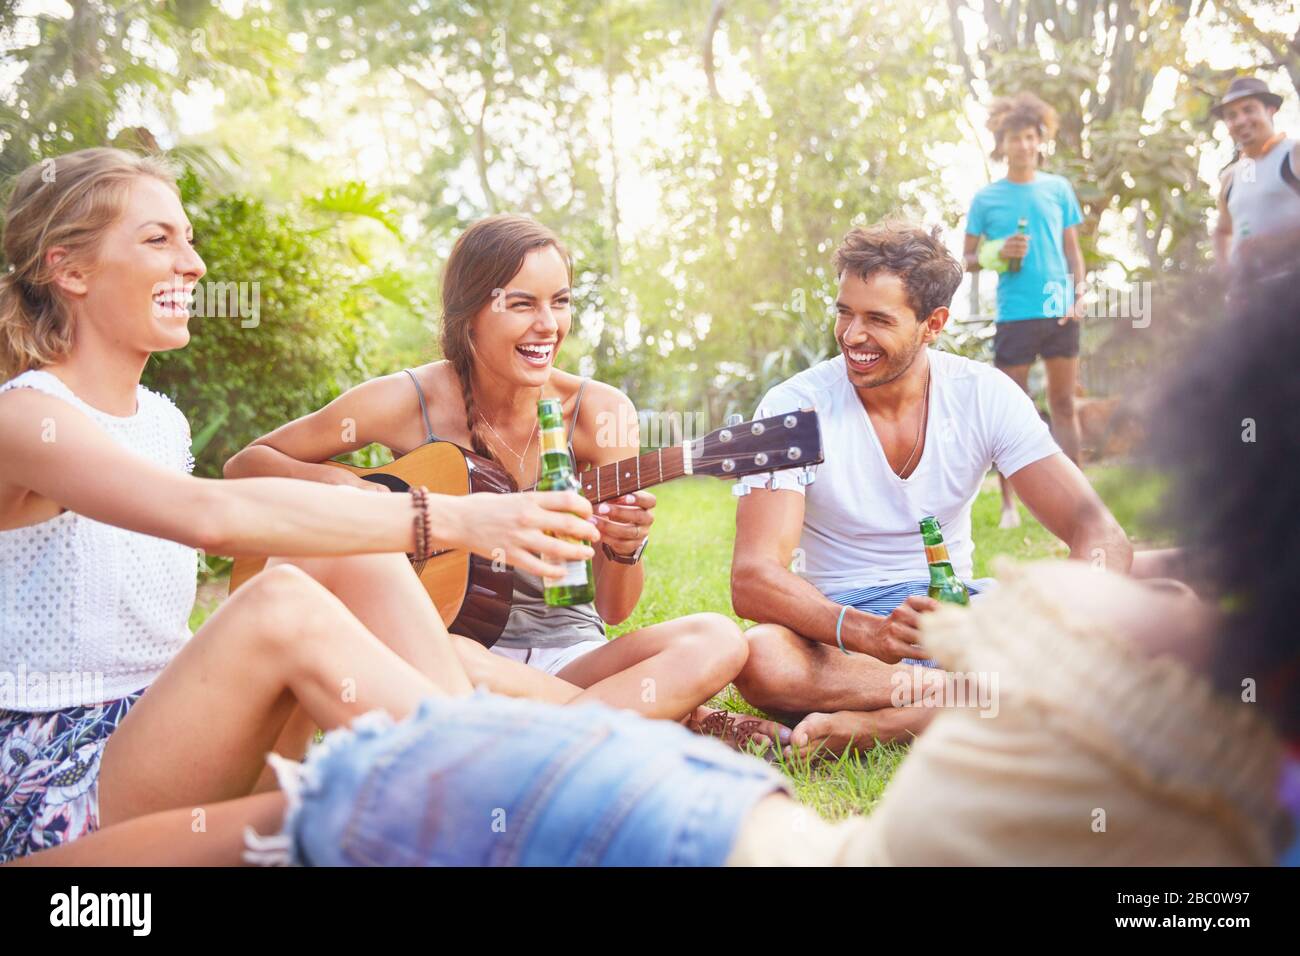 Young friends laughing, hanging out drinking and playing guitar in summer park Stock Photo